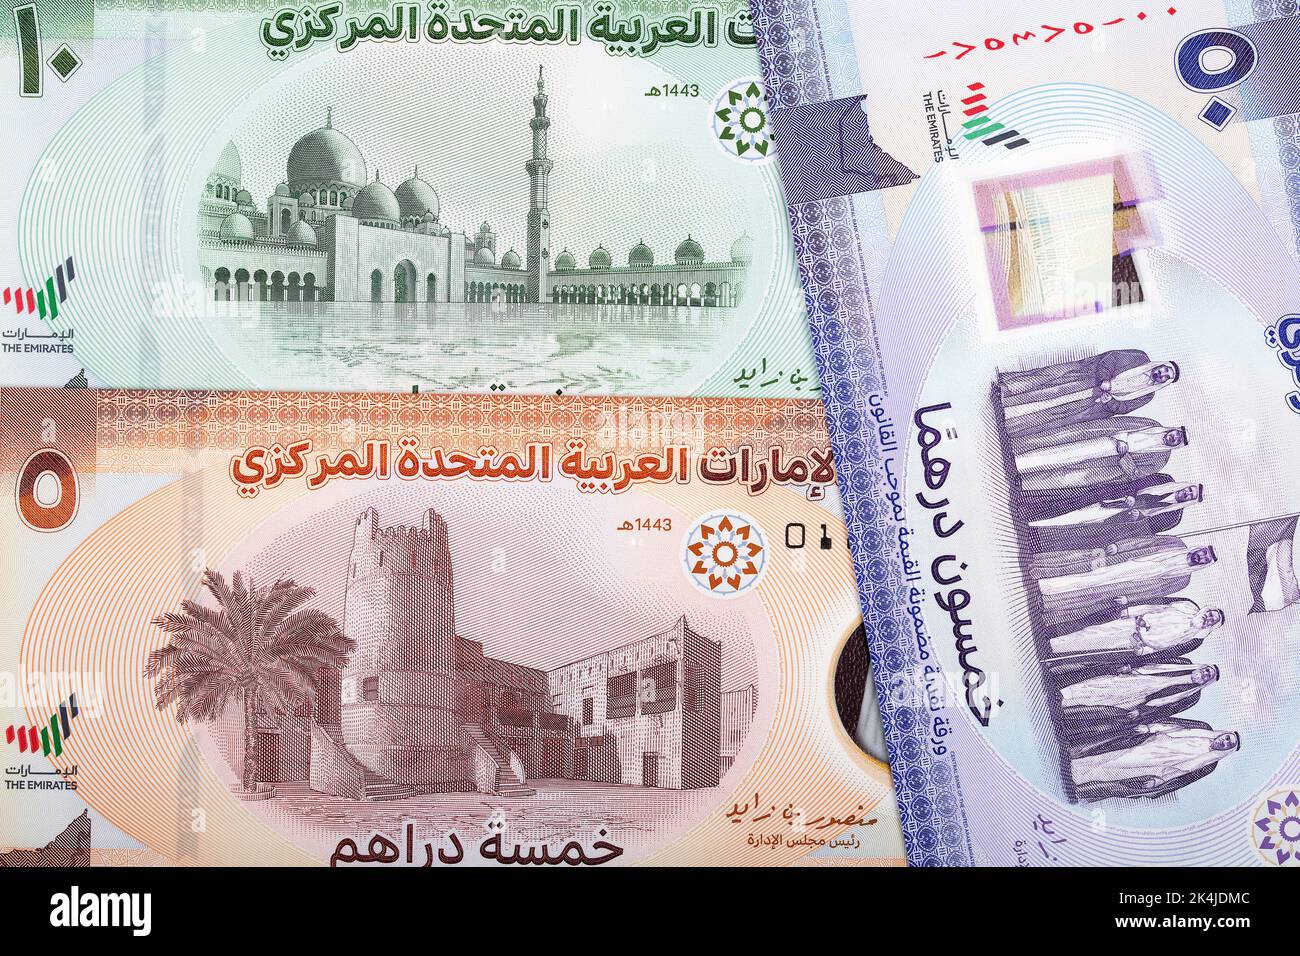 A new series of money from the United Arab Emirates - Dirhams Stock Photo